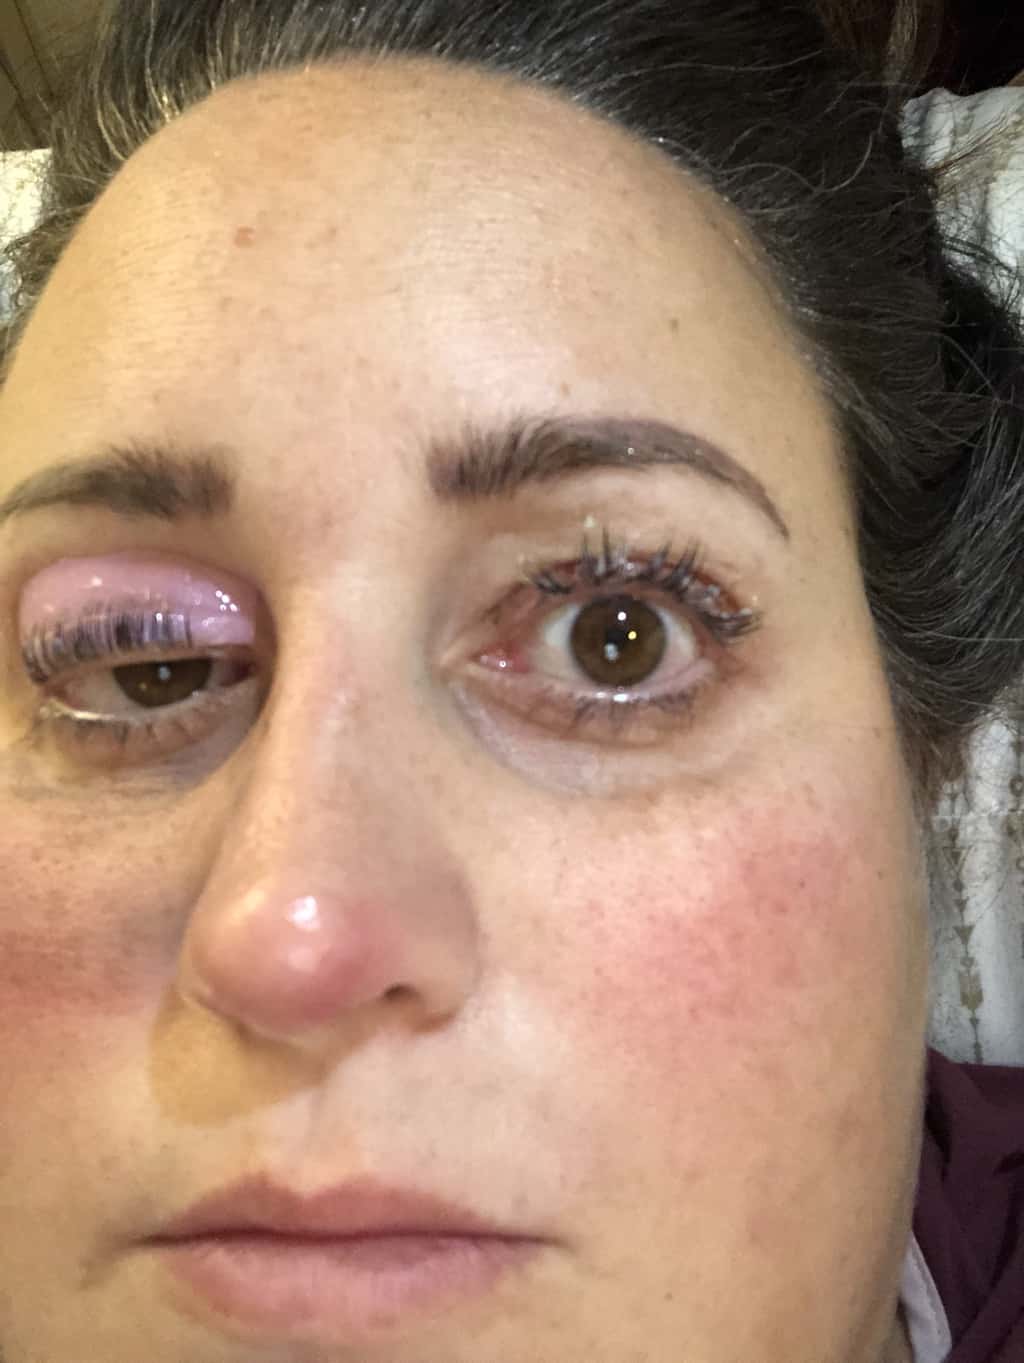 Women with eye open and gobs of gunk on her eyelashes they do appear to be curled up.